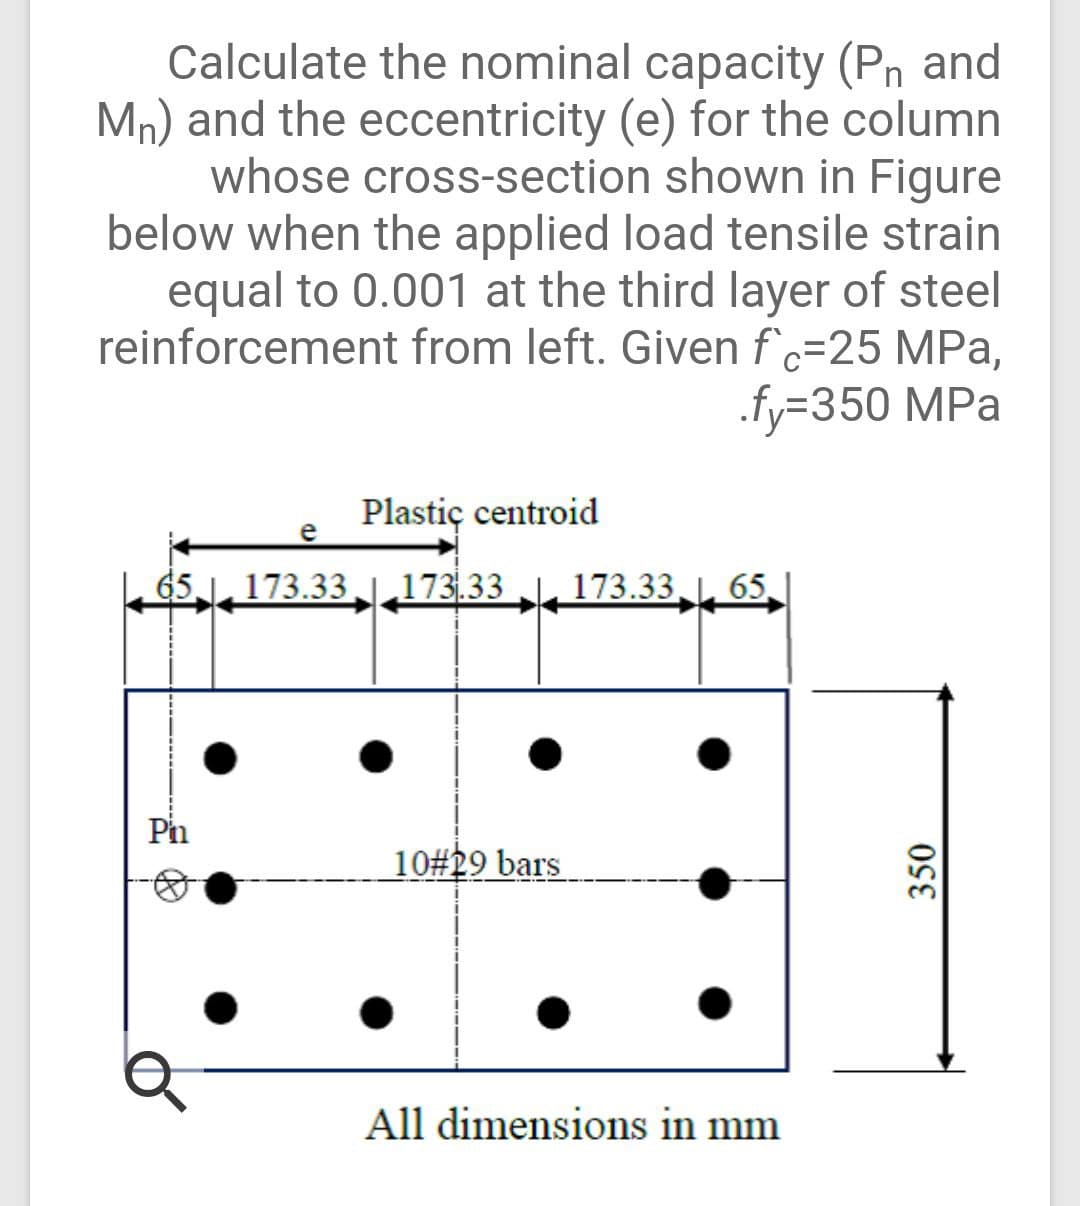 Calculate the nominal capacity (Pn and
Mn) and the eccentricity (e) for the column
whose cross-section shown in Figure
below when the applied load tensile strain
equal to 0.001 at the third layer of steel
reinforcement from left. Given f c=25 MPa,
.fy=350 MPa
Plastiç centroid
e
65 ,173.33 |,173.33 , 173.33 L, 65
Pi
10#29 bars
All dimensions in mm
350
